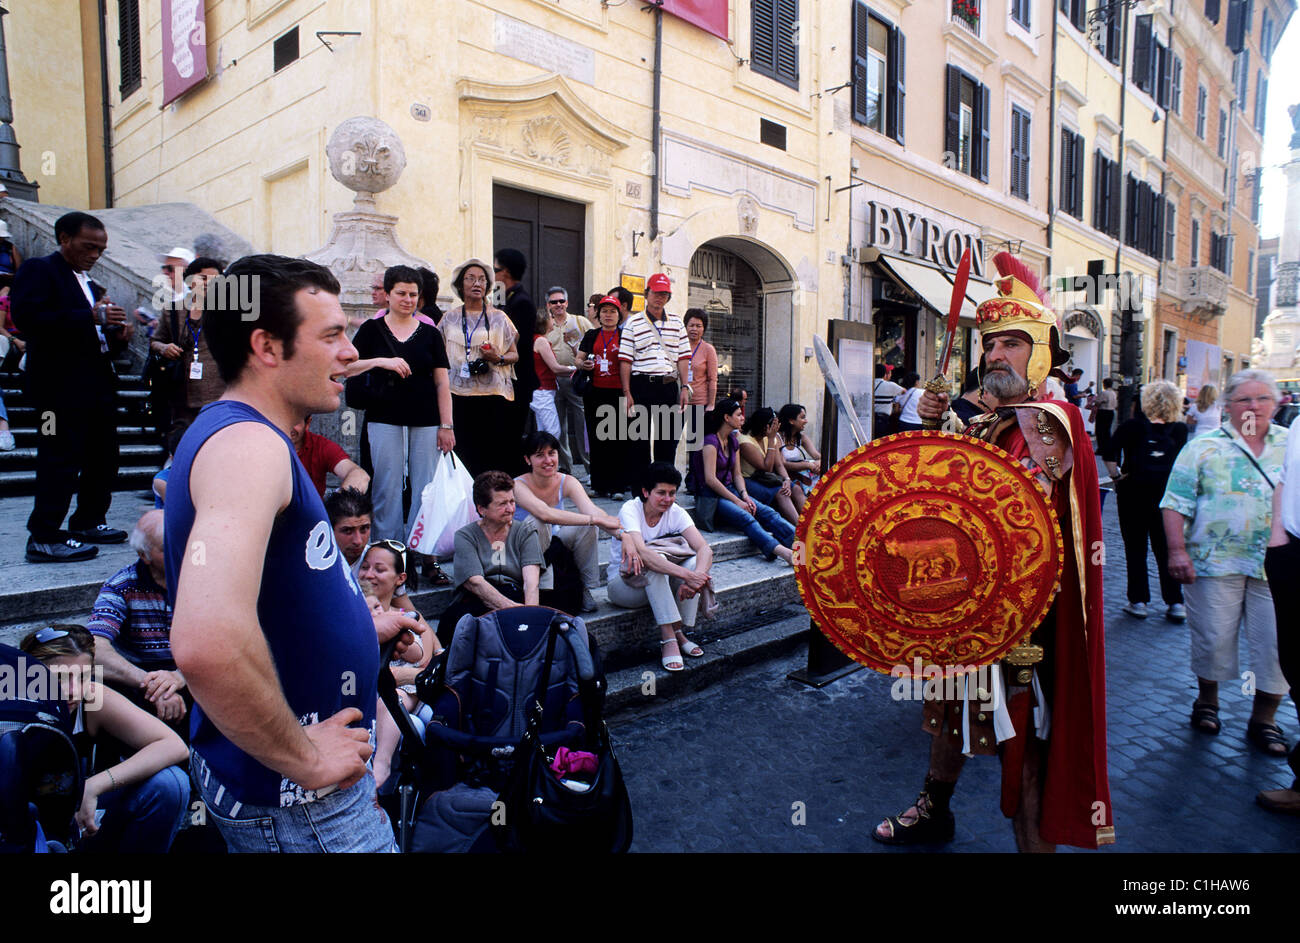 Italy, Lazio, Rome, Espagna square, a man in gladiator dress for pictures with tourists, 2 Euros per picture Stock Photo